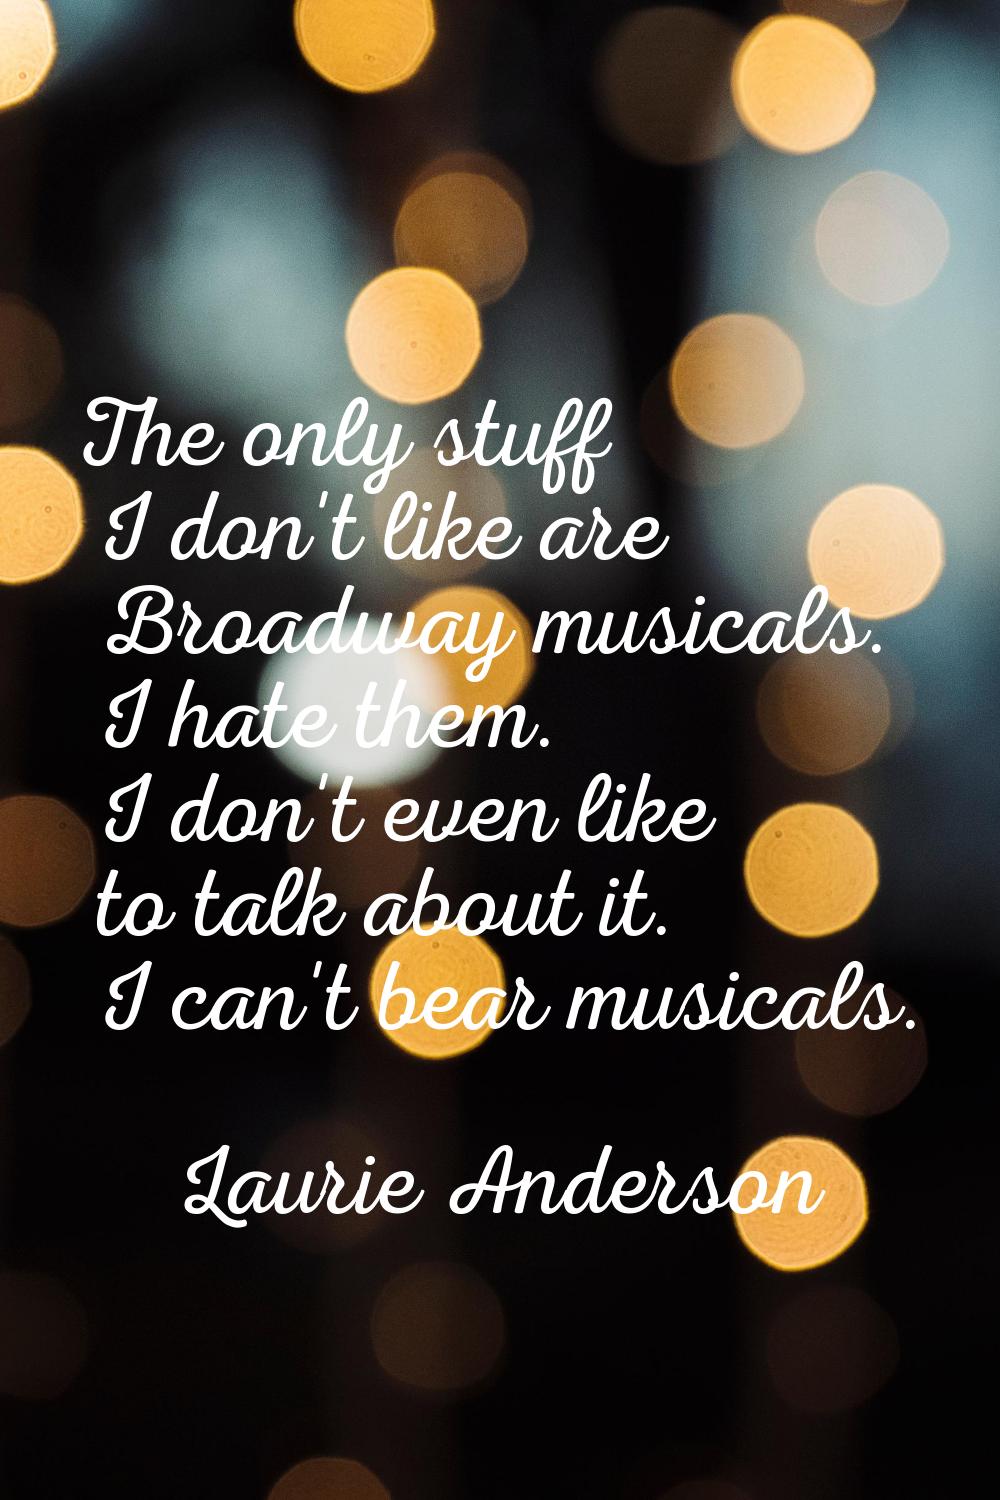 The only stuff I don't like are Broadway musicals. I hate them. I don't even like to talk about it.